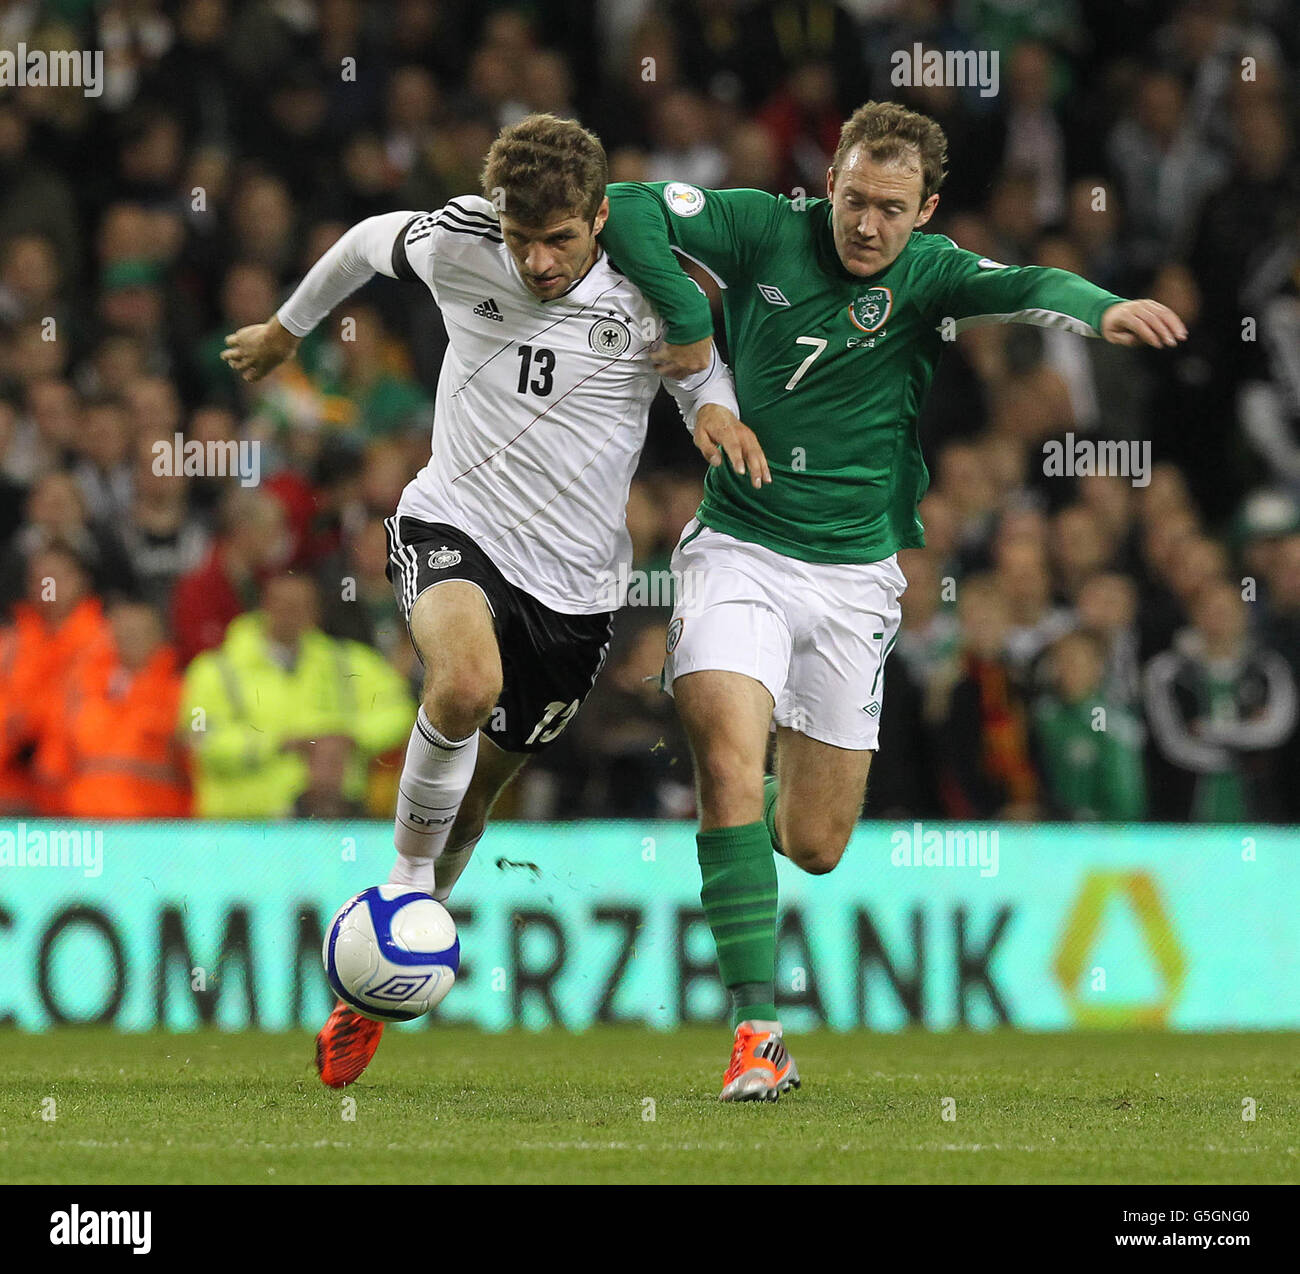 Republic of Ireland'sAiden McGeady (right) and Germanys Thomas Muller battle for the ball during the 2014 FIFA World Cup Qualifying match at the Aviva Stadium, Dublin, Ireland. Stock Photo